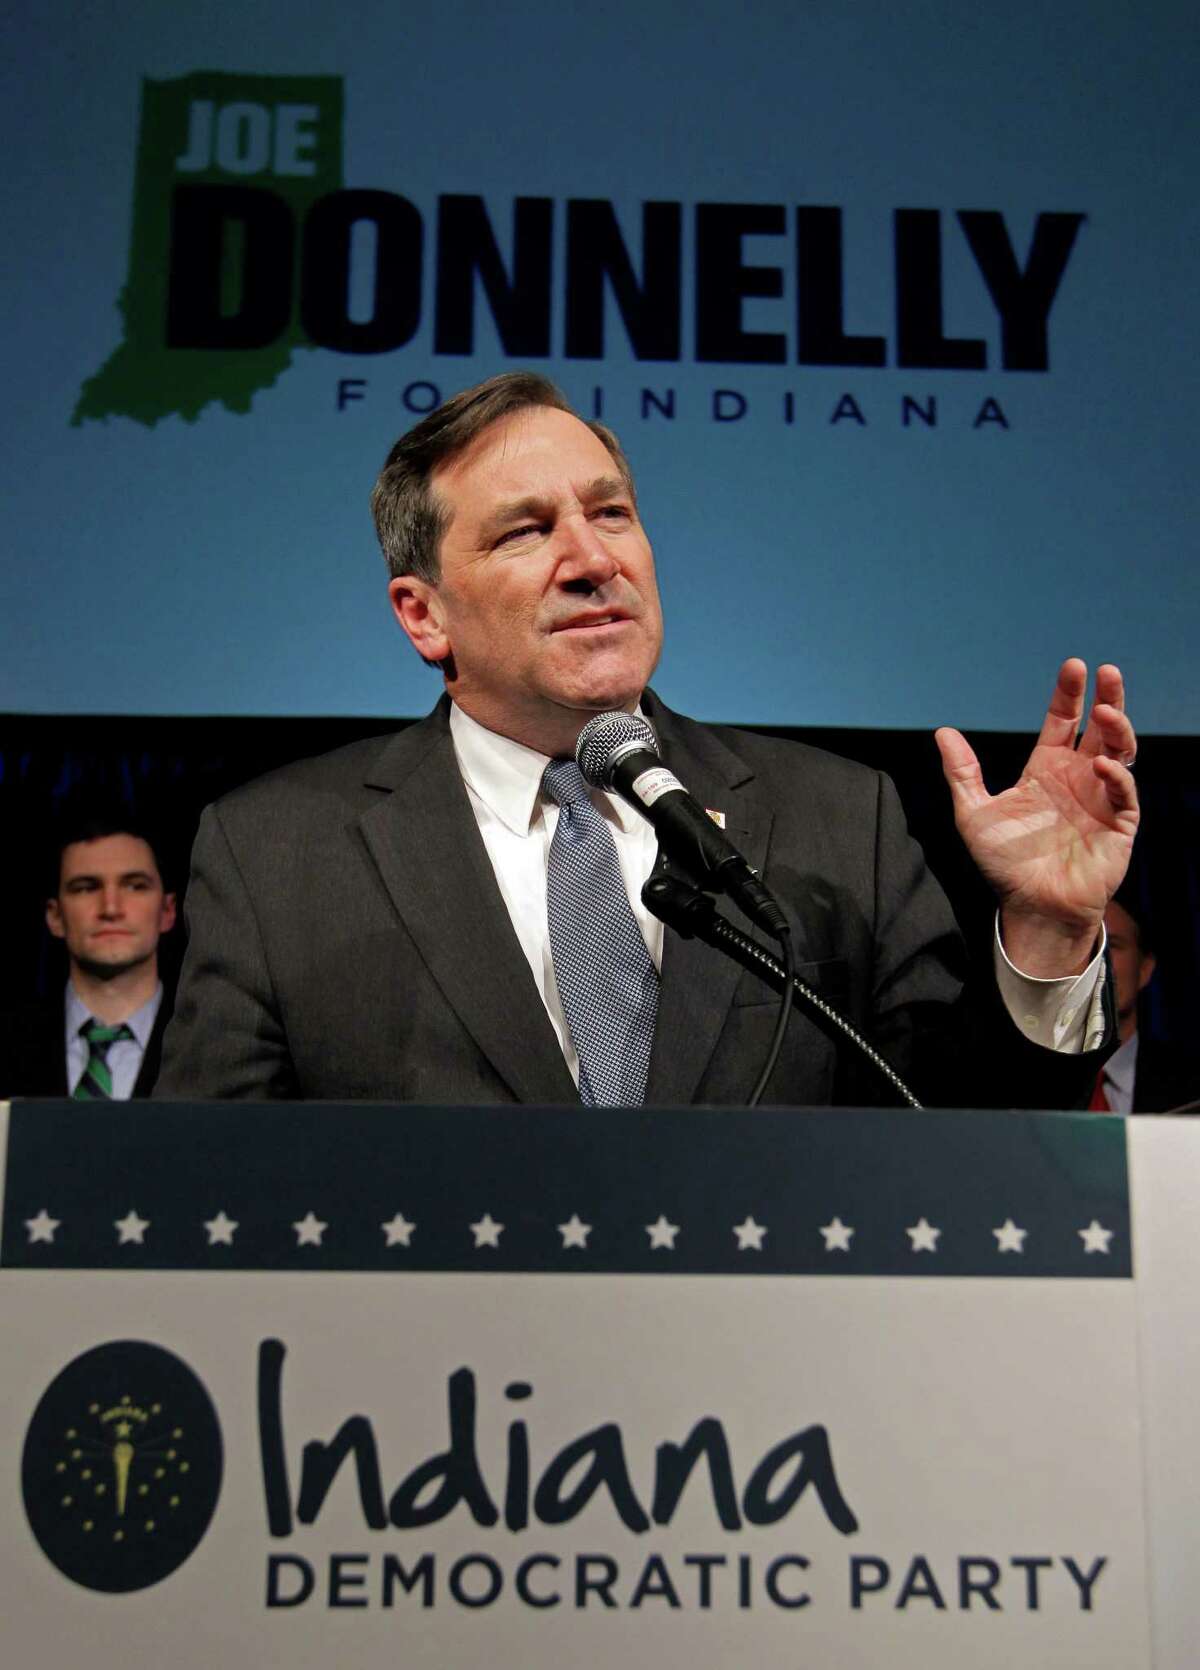 Democrat Joe Donnelly thanks supporters after winning the U.S. Senate seat over Republican Richard Mourdock at an election night celebration in Indianapolis, Tuesday, Nov. 6, 2012. Donnelly triumphed in one of the nation's most tumultuous Senate races, capitalizing on fallout over his tea party-backed opponent's comment that a pregnancy resulting from rape is "something God intended" to capture a seat that just a year ago looked to be a lock for Republican U.S. Sen. Richard Lugar. (AP Photo/Michael Conroy)